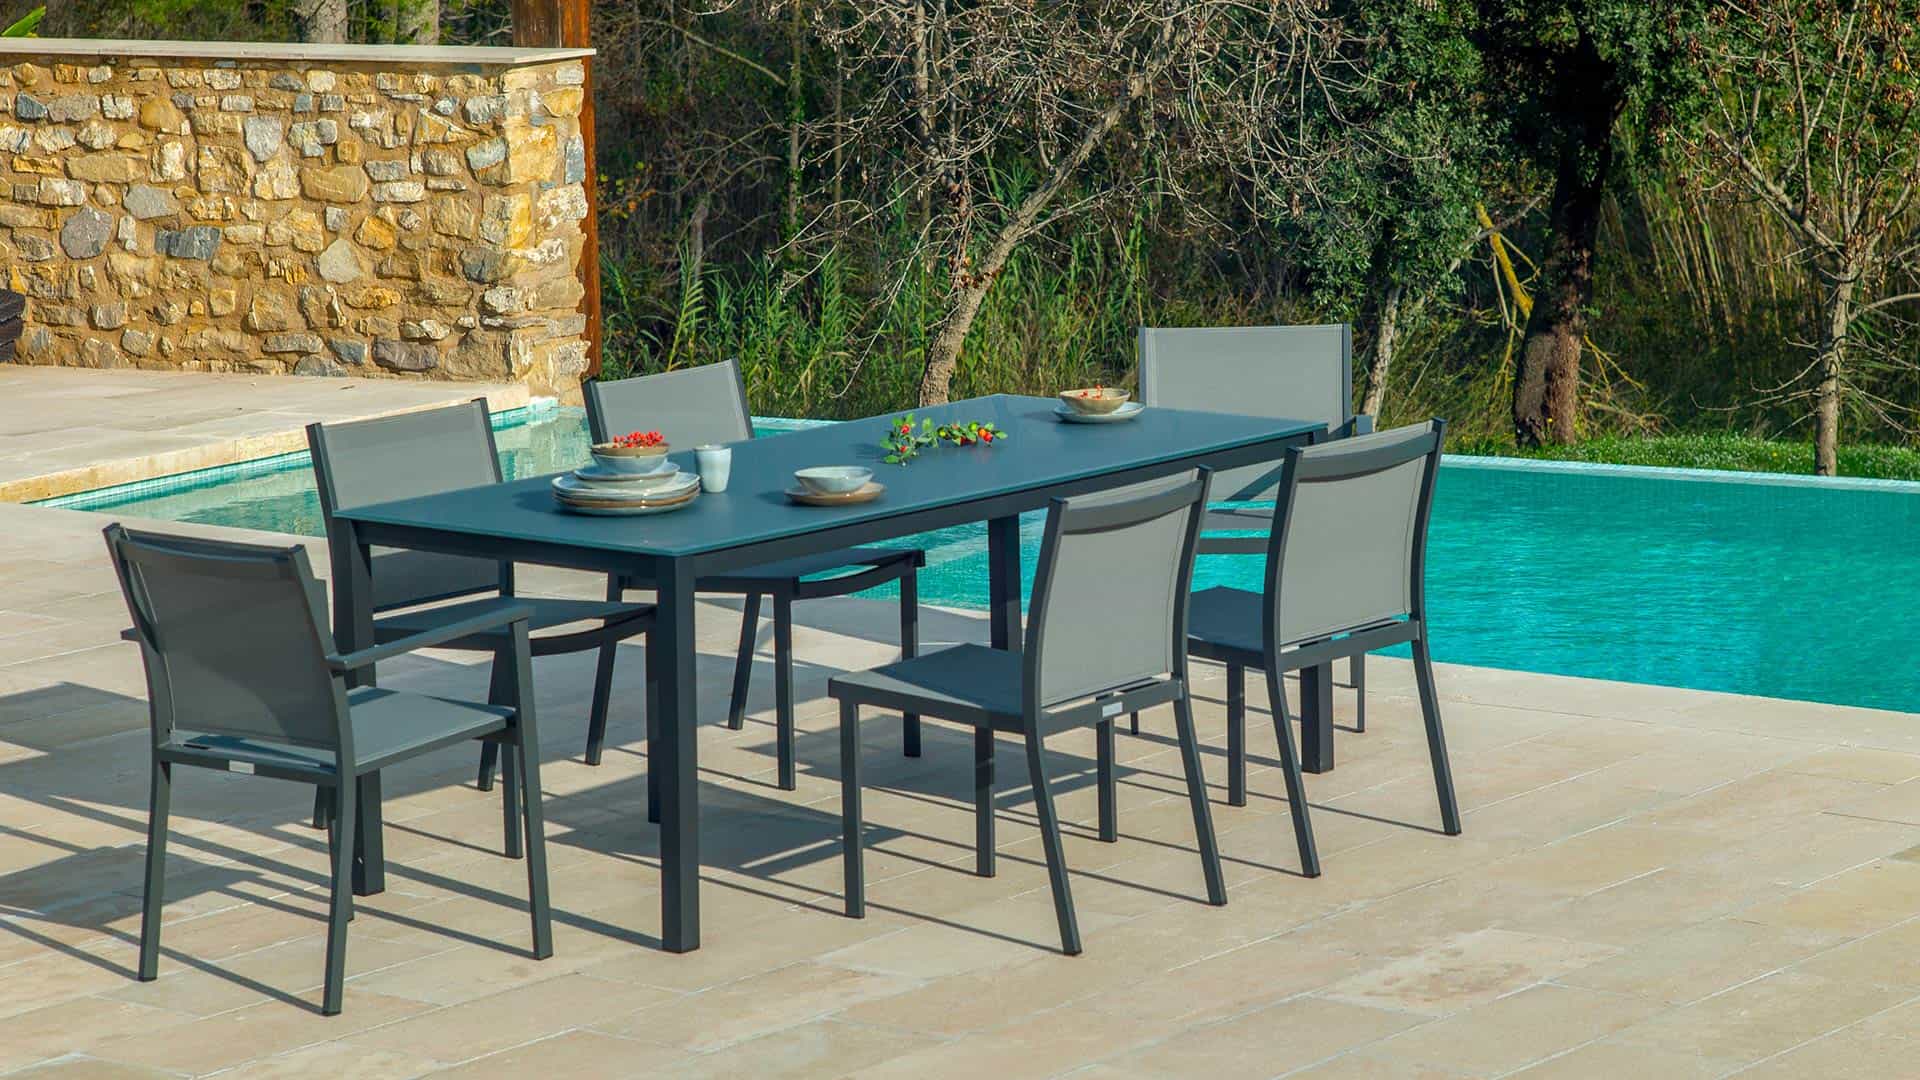 Outdoor dining set next to pool